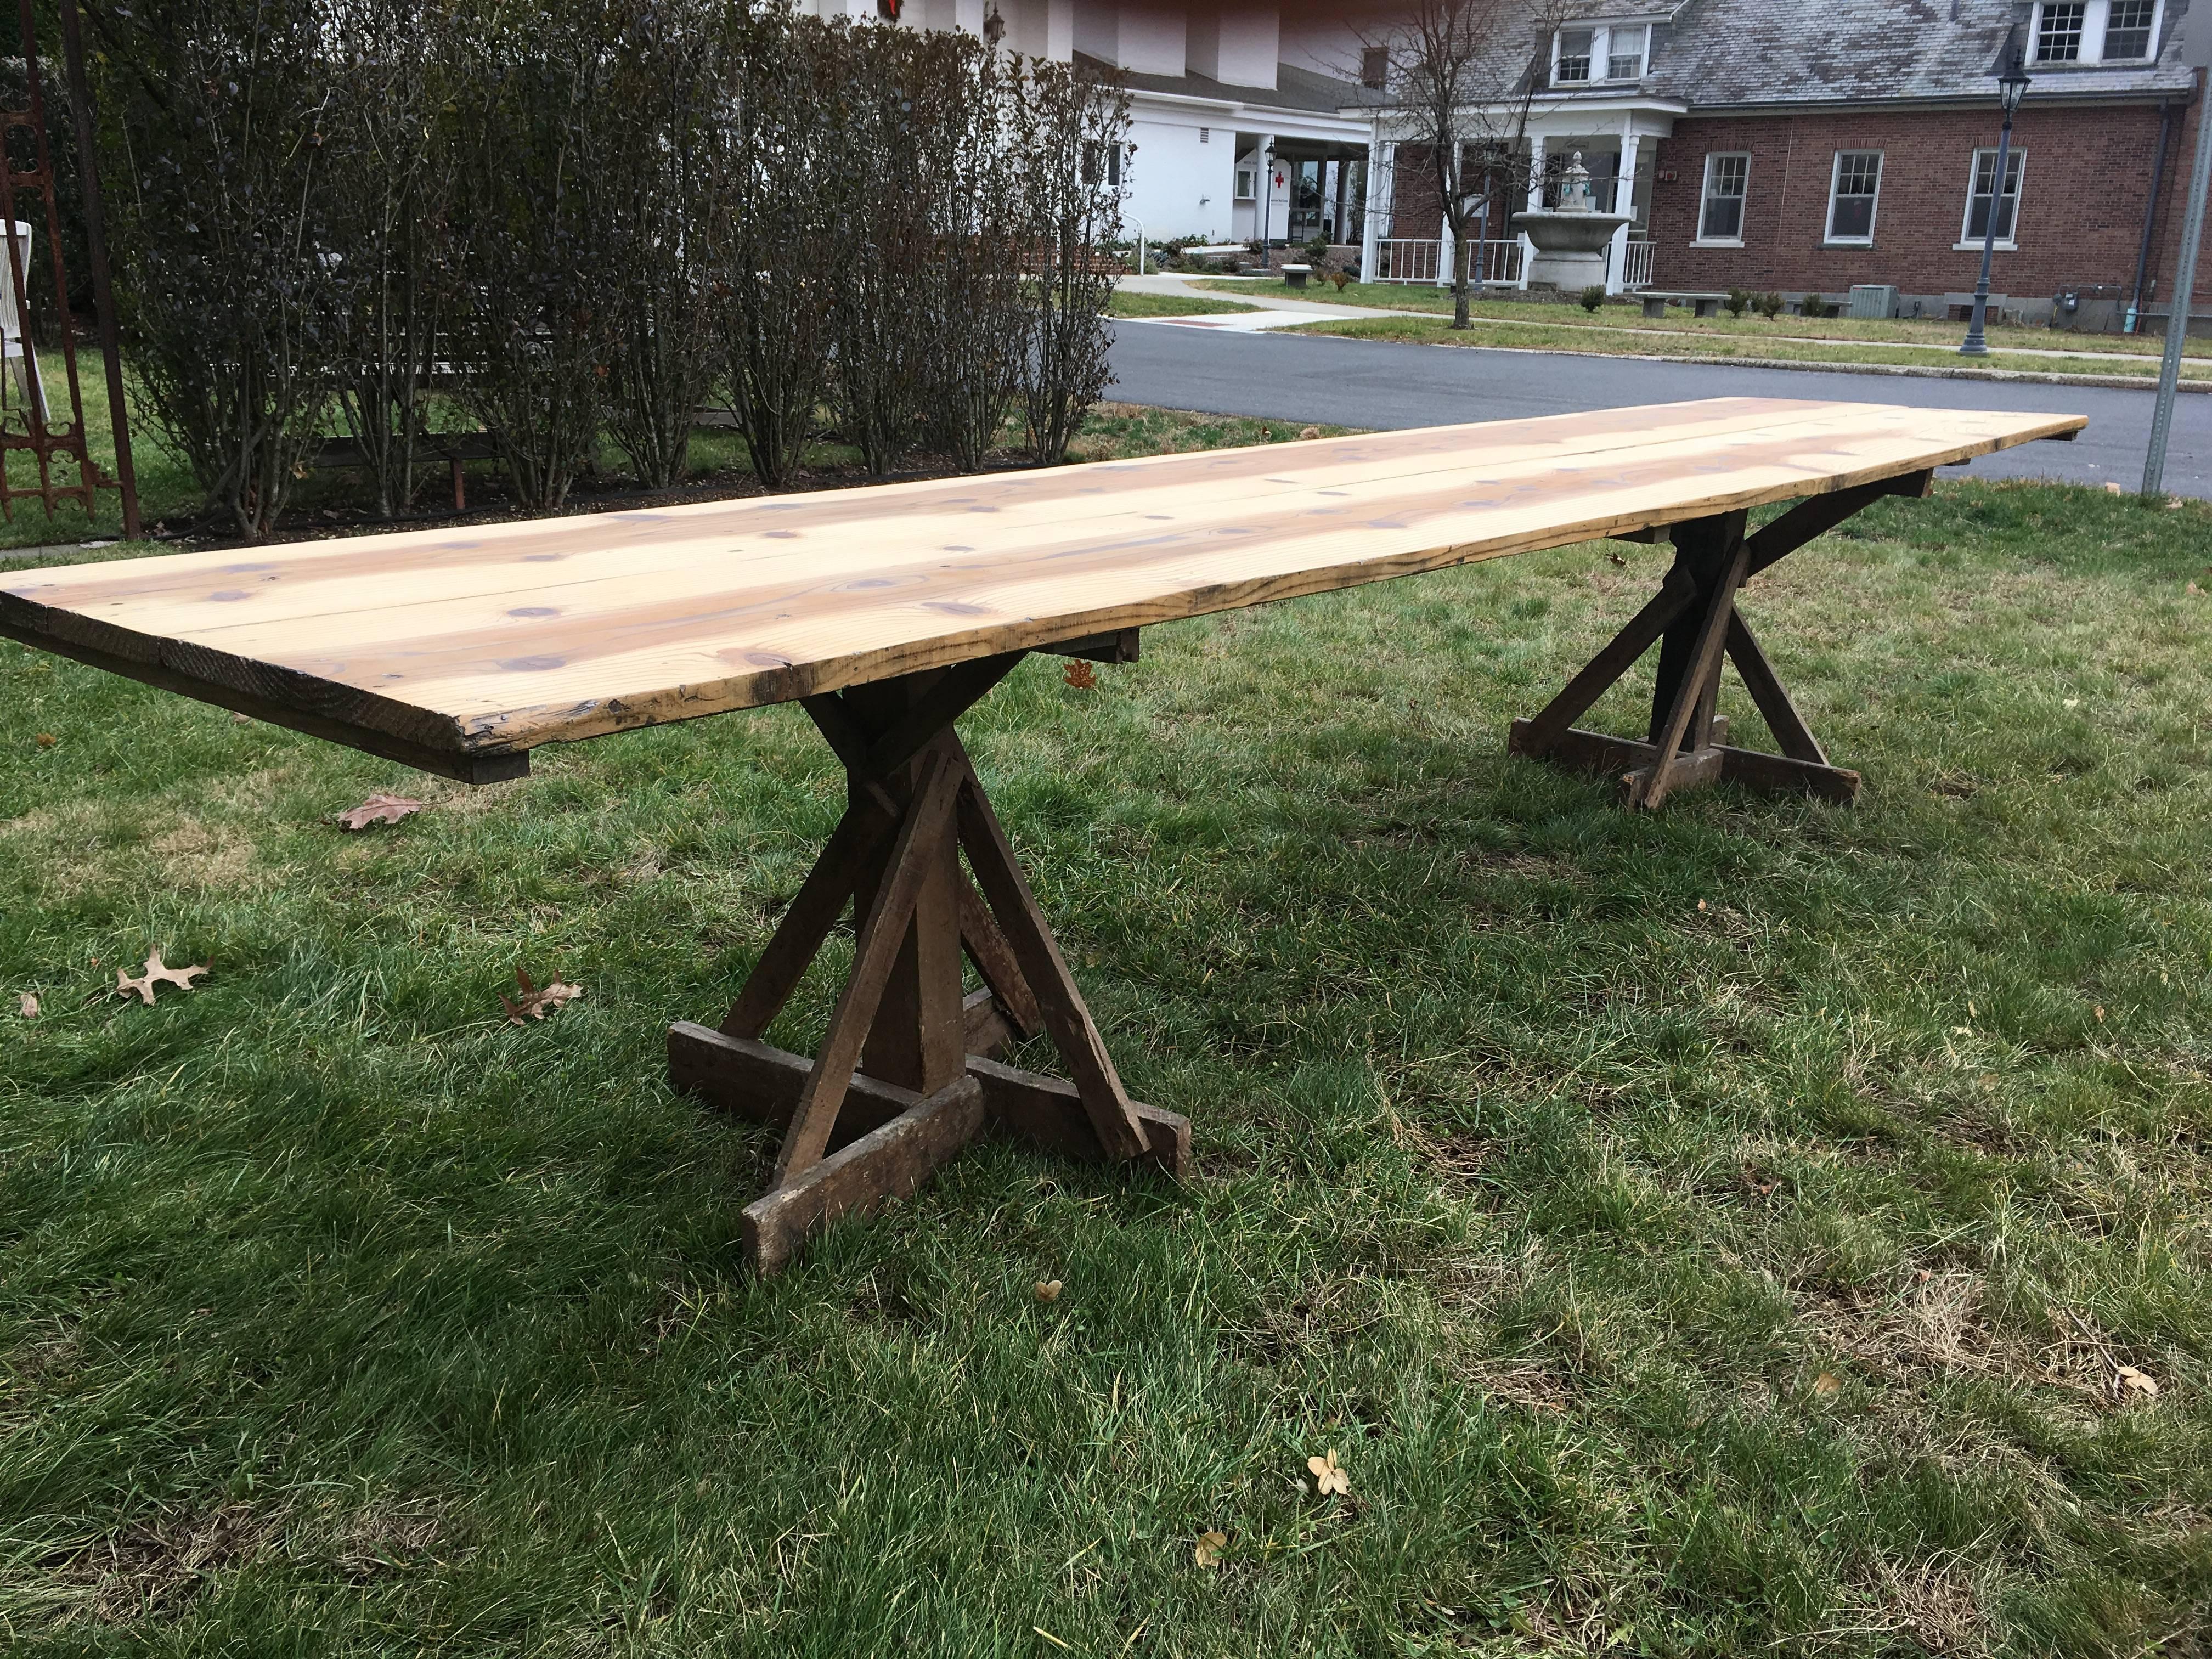 When we bought this rustic table in Provence, it had so much staining to the top that we really felt it needed to be redone. Who would have thought such amazing grain would reveal itself? The double plank pine top tells its age, while the untouched